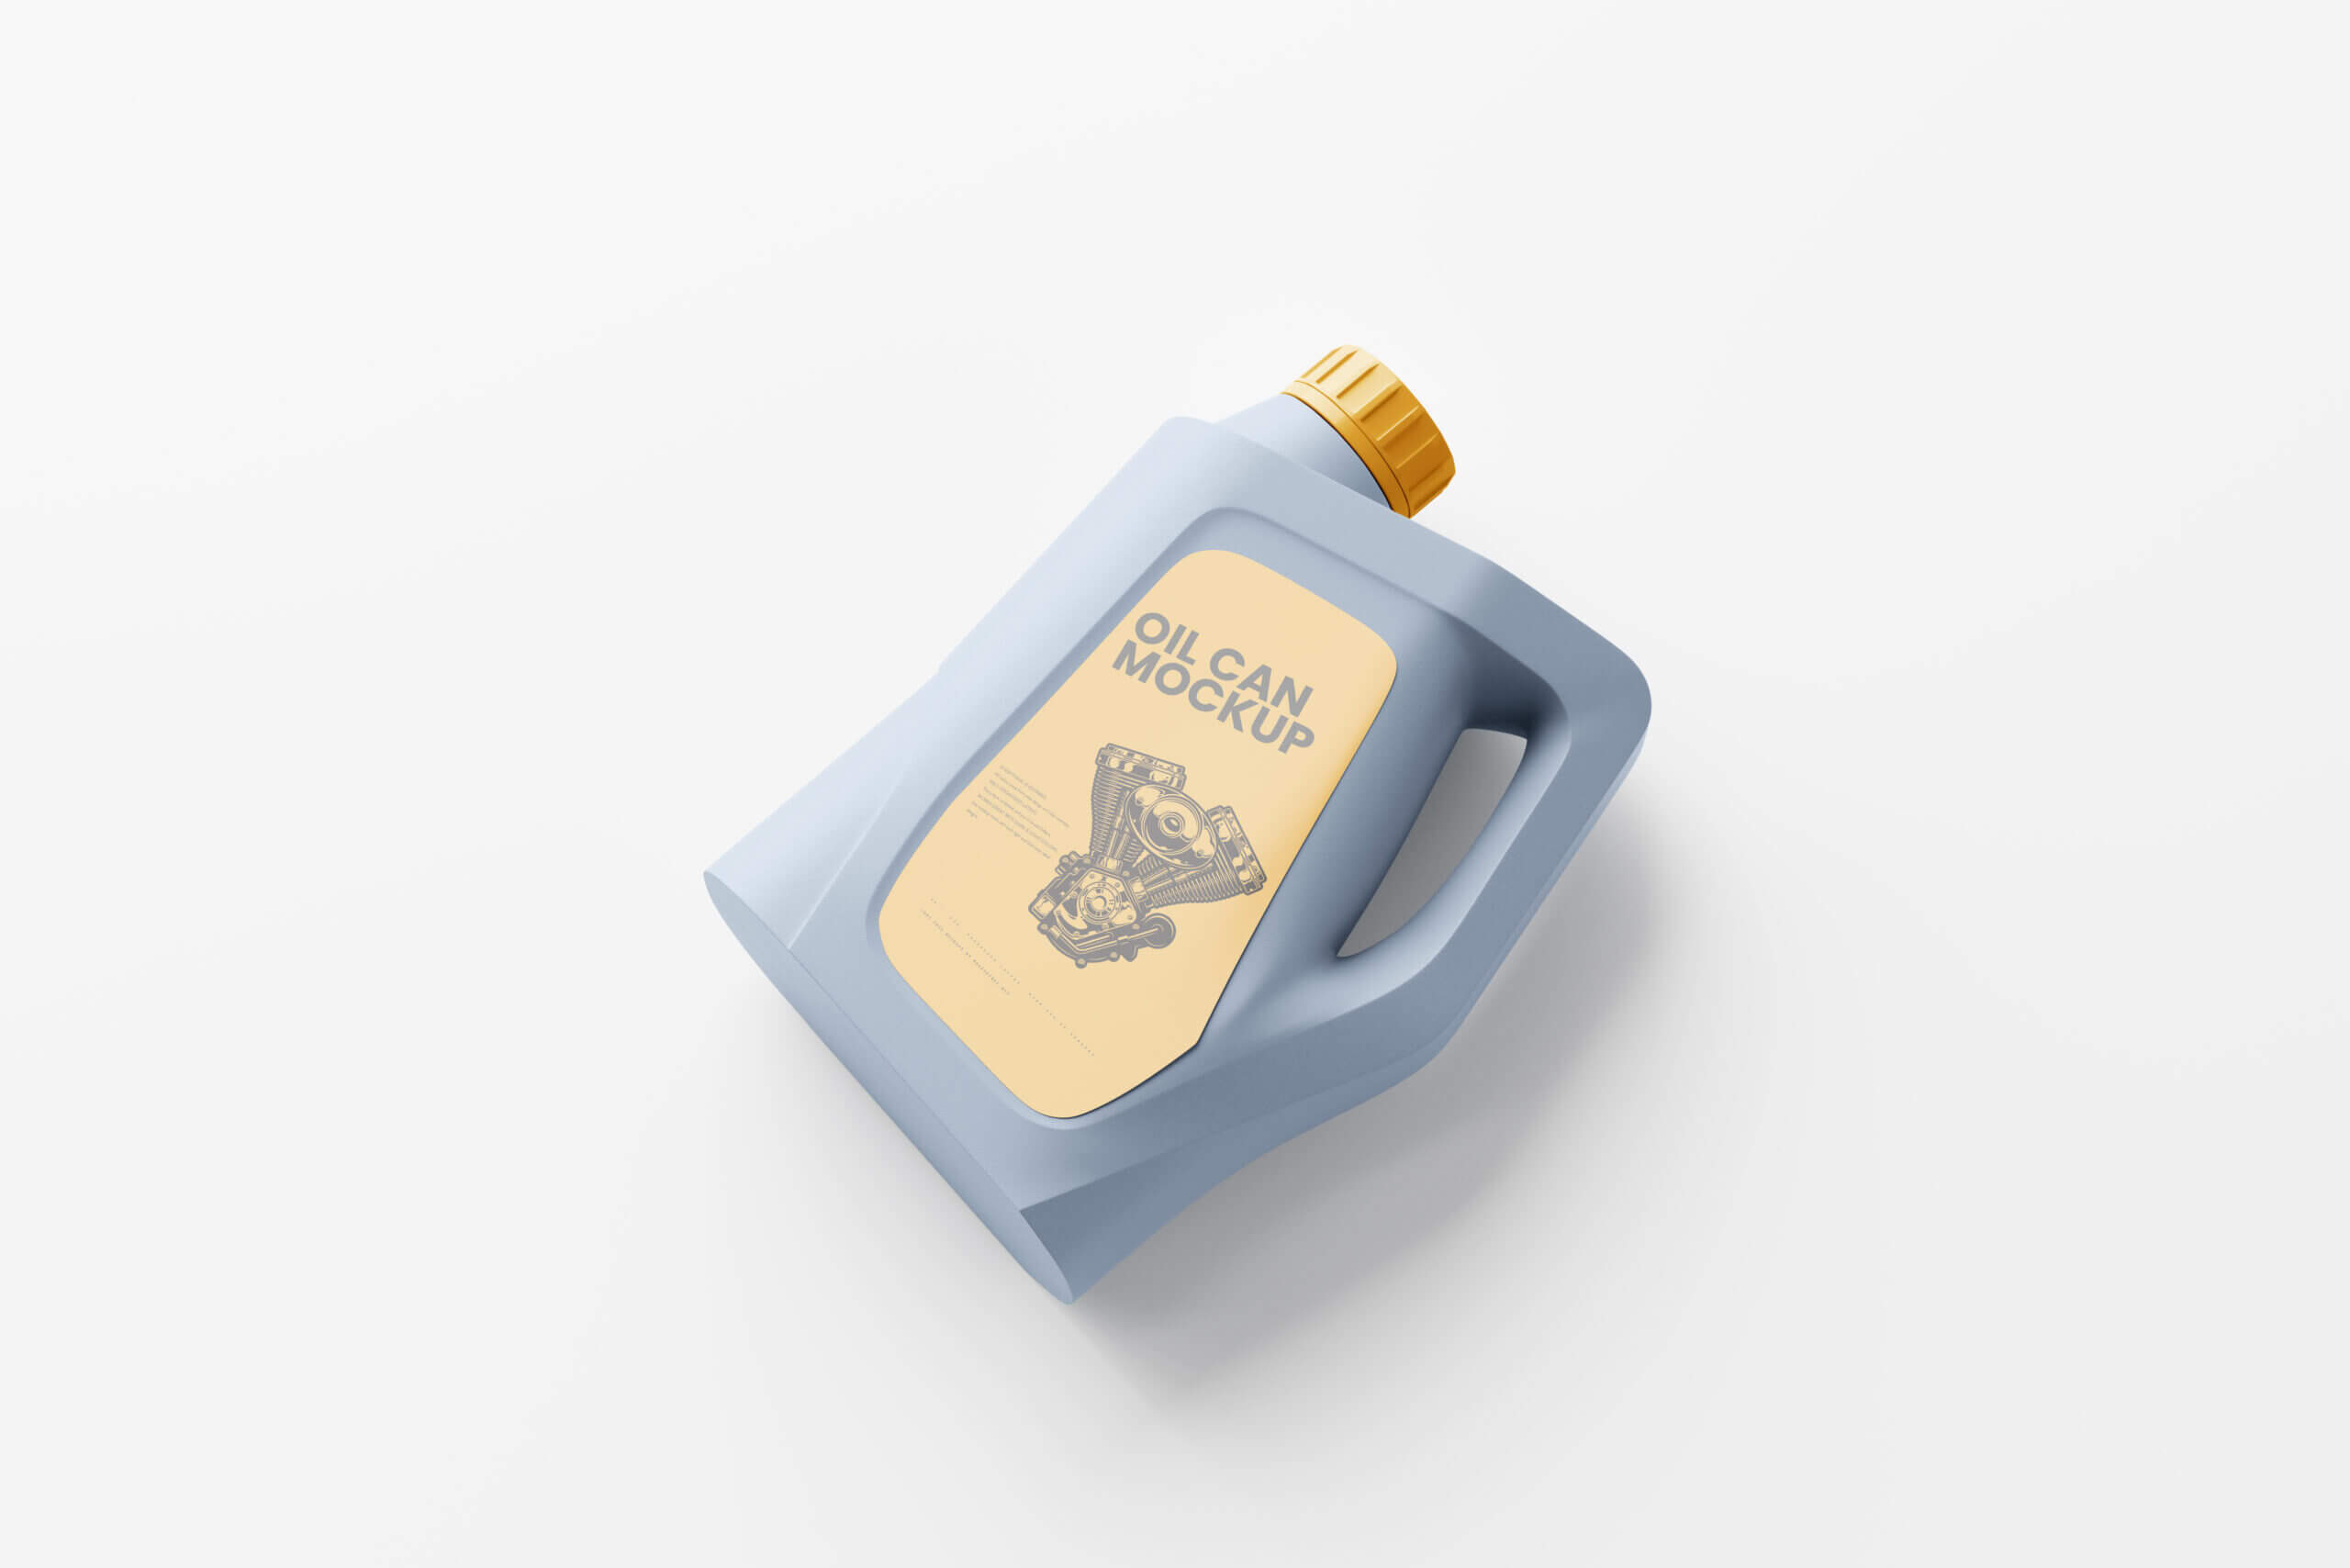 10 Free Engine Oil Can Mockup PSD Files6